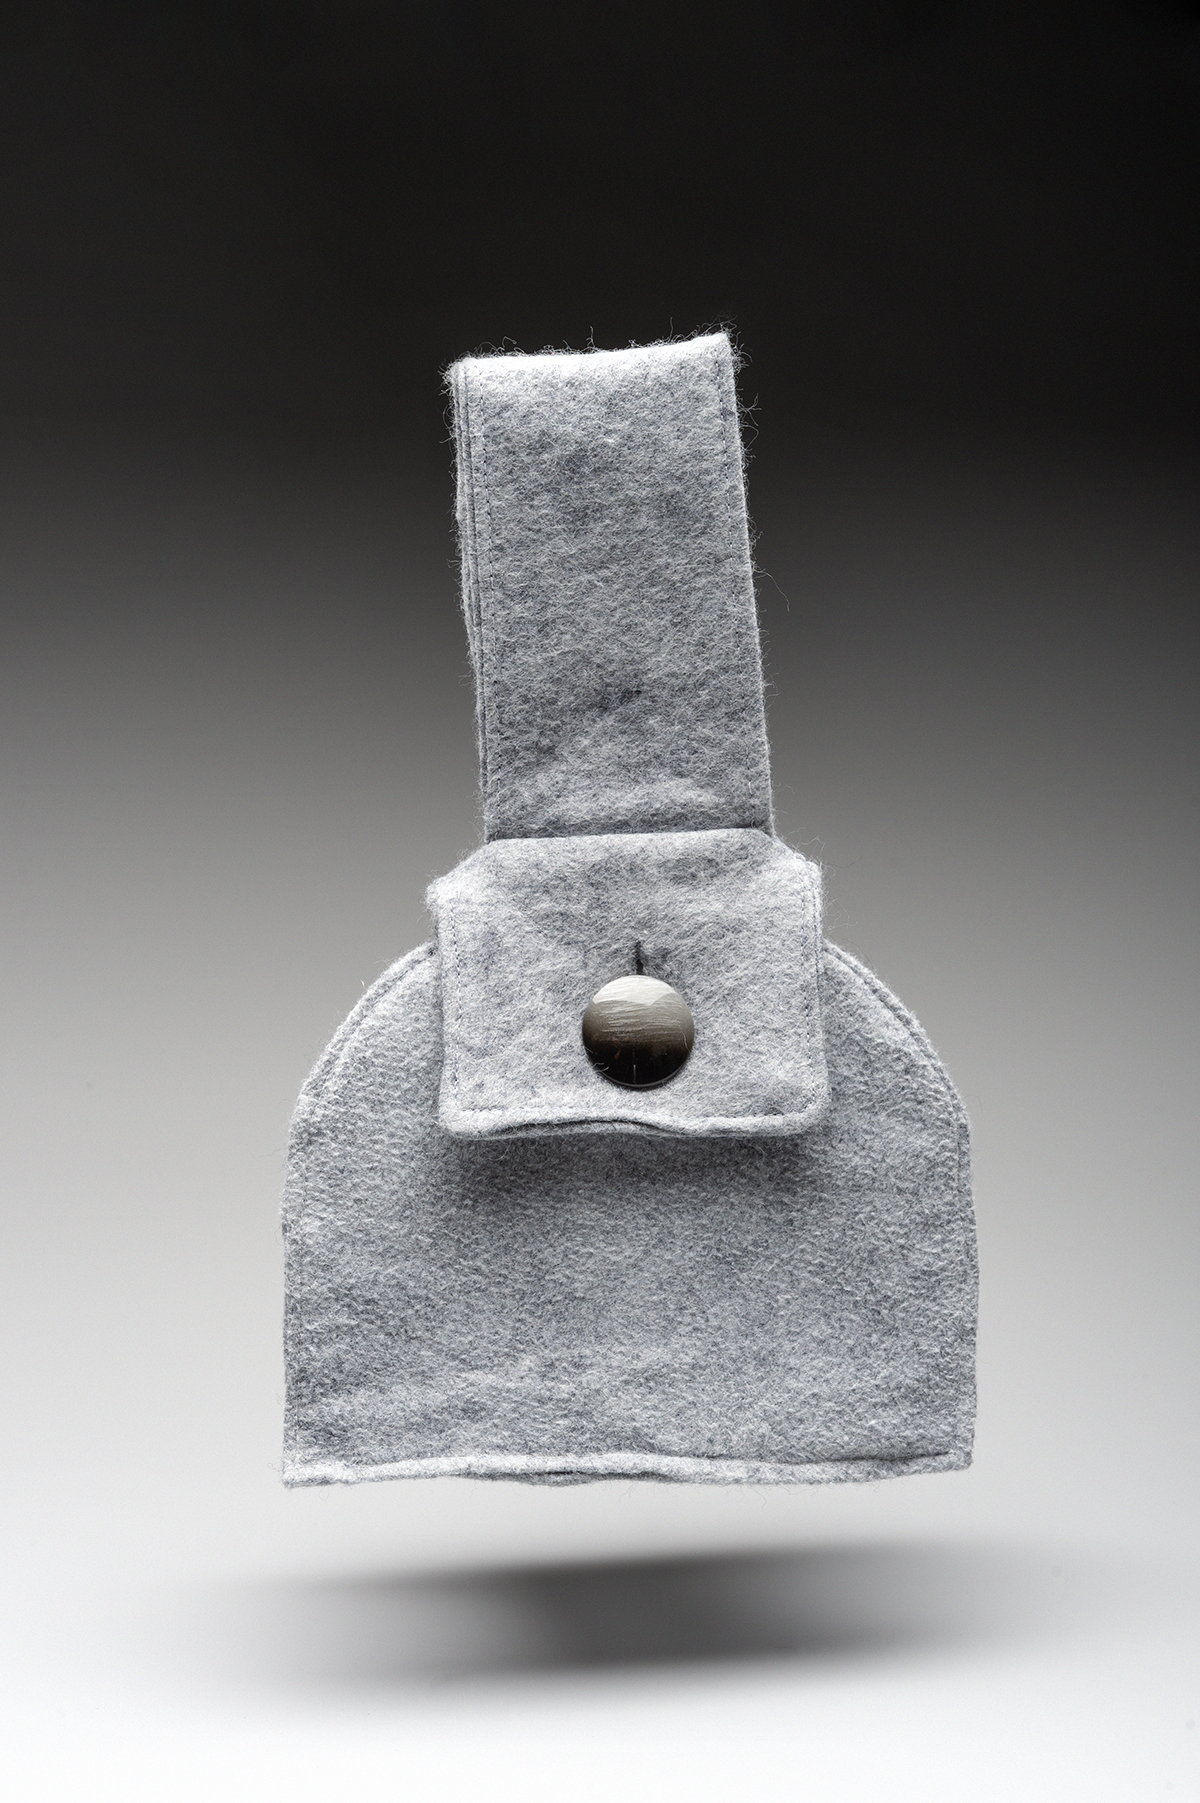 A grey bag design with a large button affixed to it.